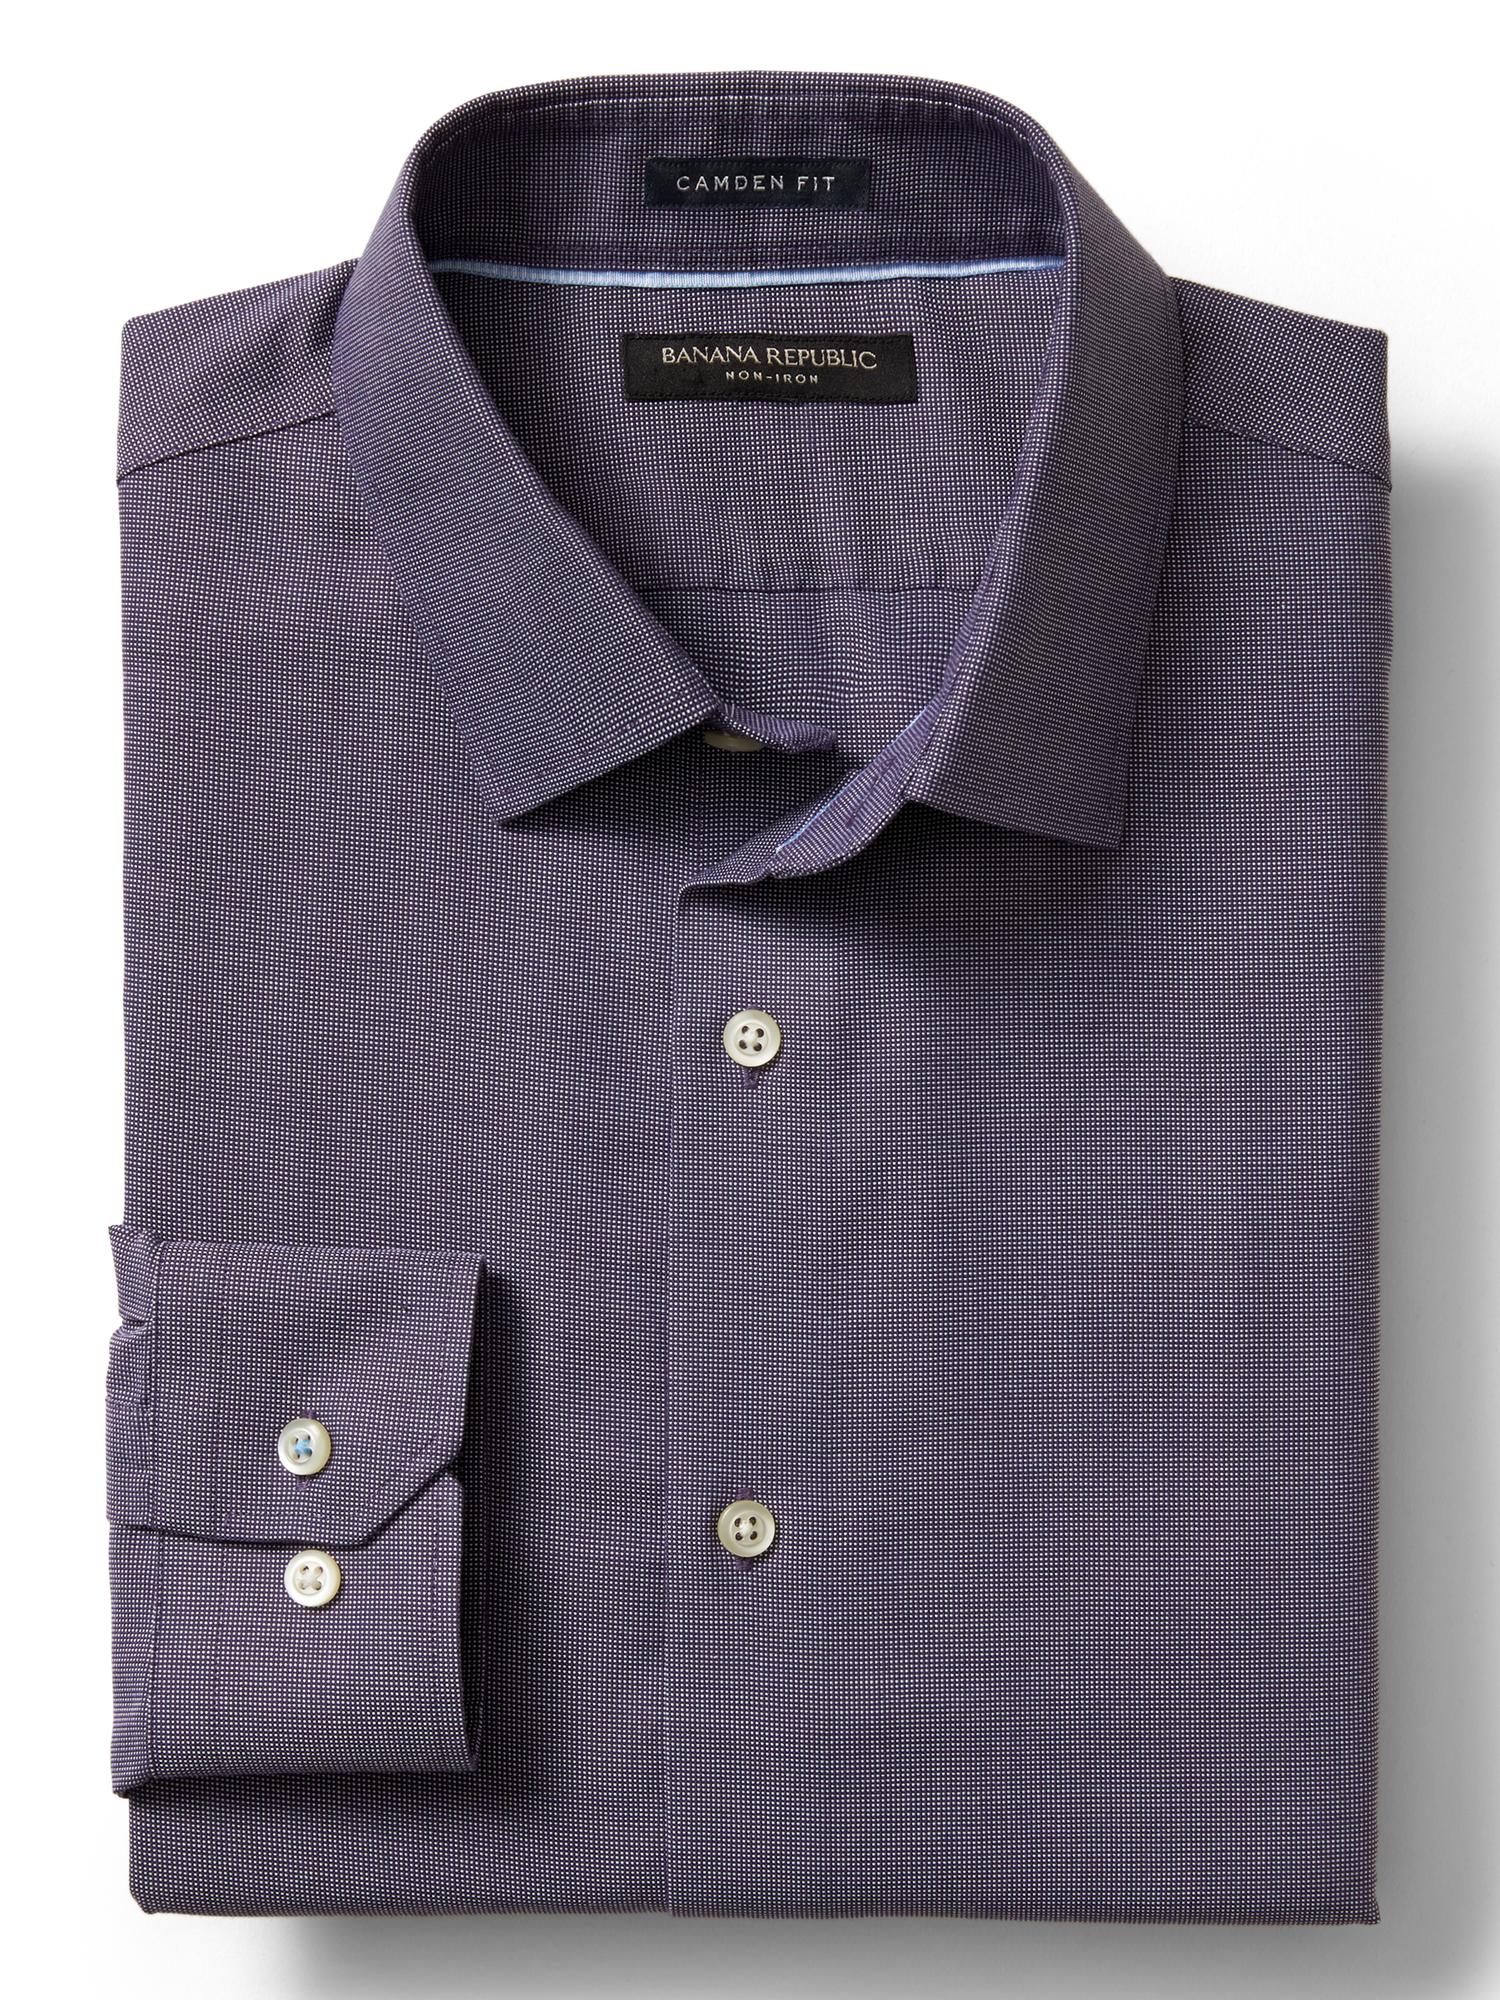 Camden-Fit Non-Iron Square Weave Shirt